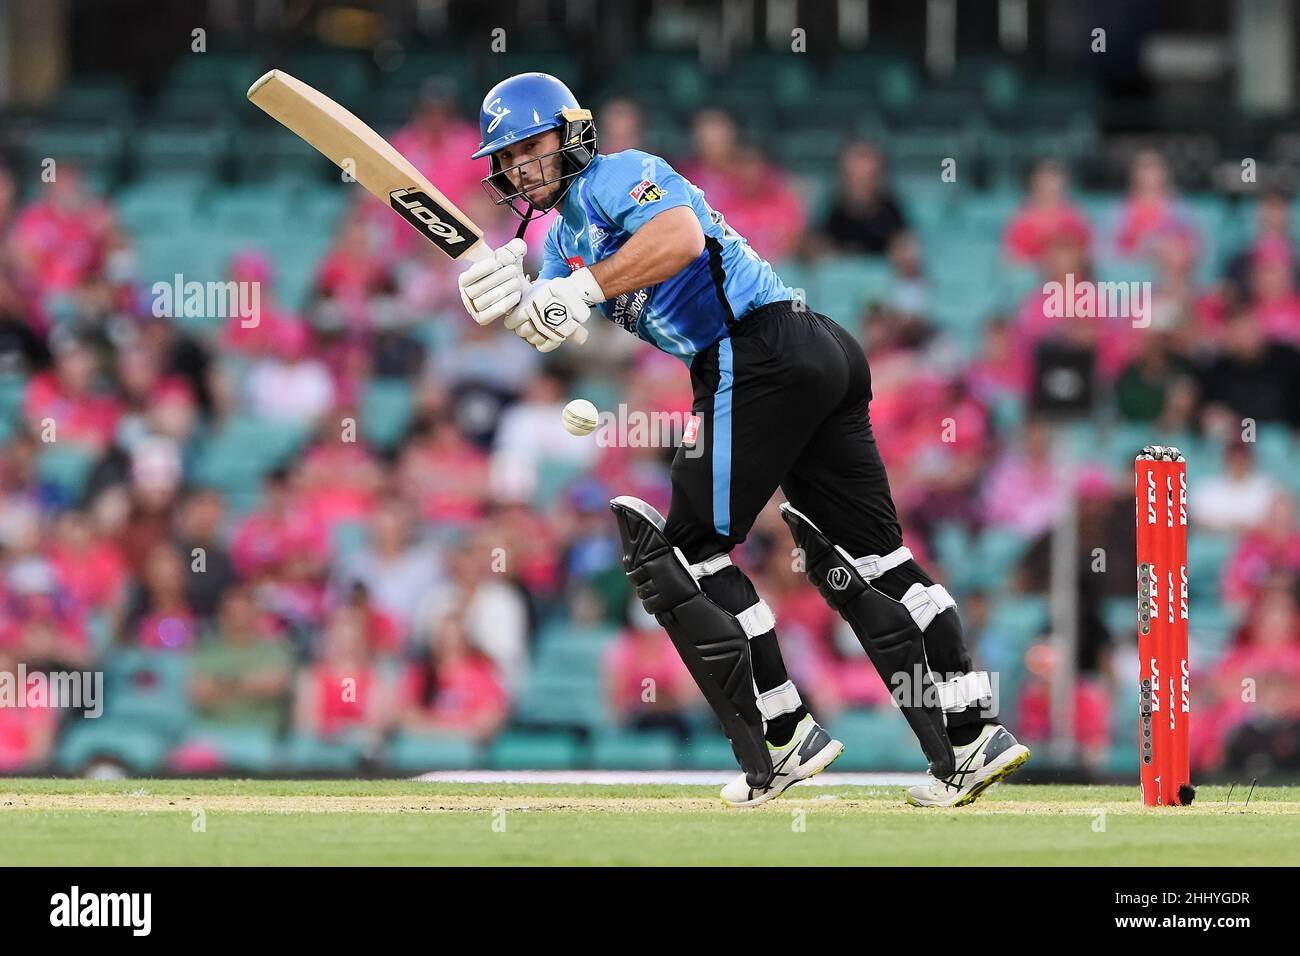 Sydney, Australia, 26 January, 2022. Jon Wells of the Strikers hits the ball during the Big Bash League Challenger cricket match between Sydney Sixers and Adelaide Strikers at The Sydney Cricket Ground on January 26, 2022 in Sydney, Australia. Credit: Steven Markham/Speed Media/Alamy Live News Stock Photo